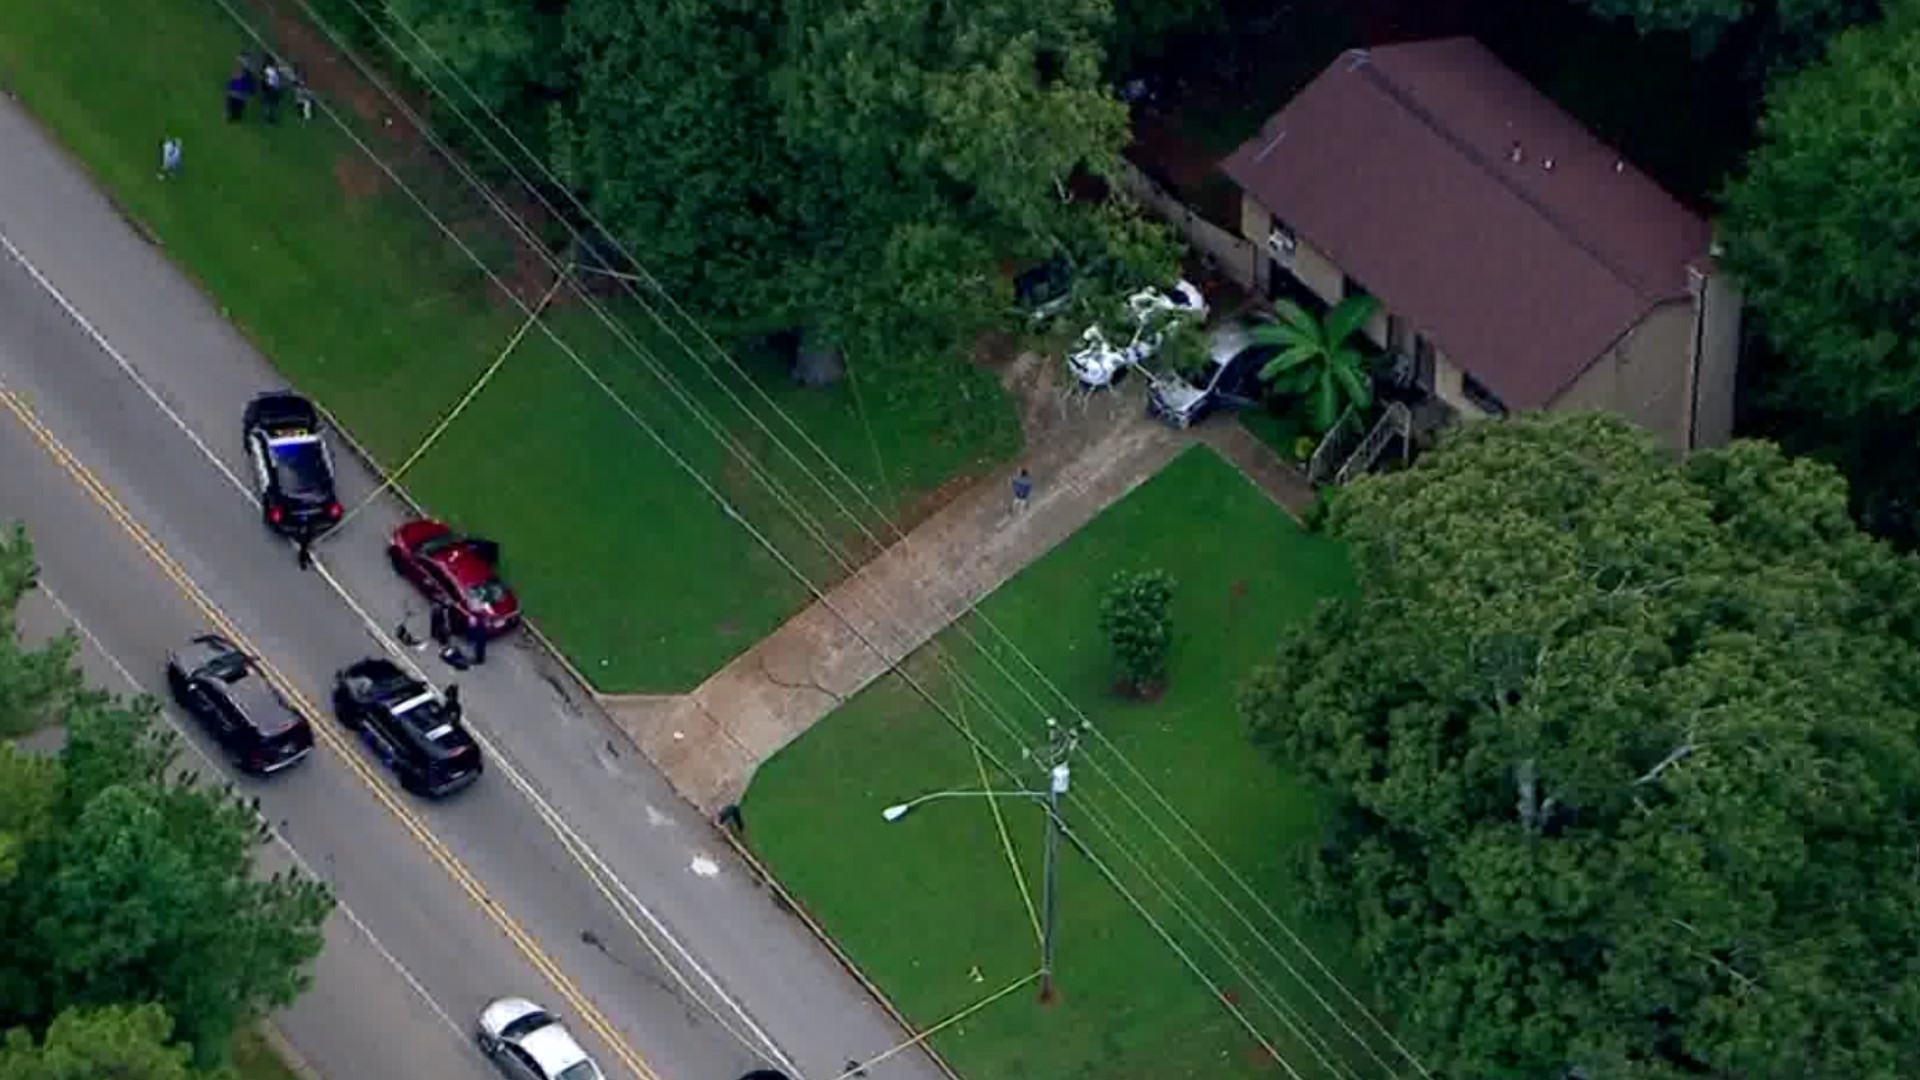 11Alive SkyTracker flew over a home along Flakes Mill Road where crime scene tape was spotted. Two men are critically hurt and another had minor injuries.